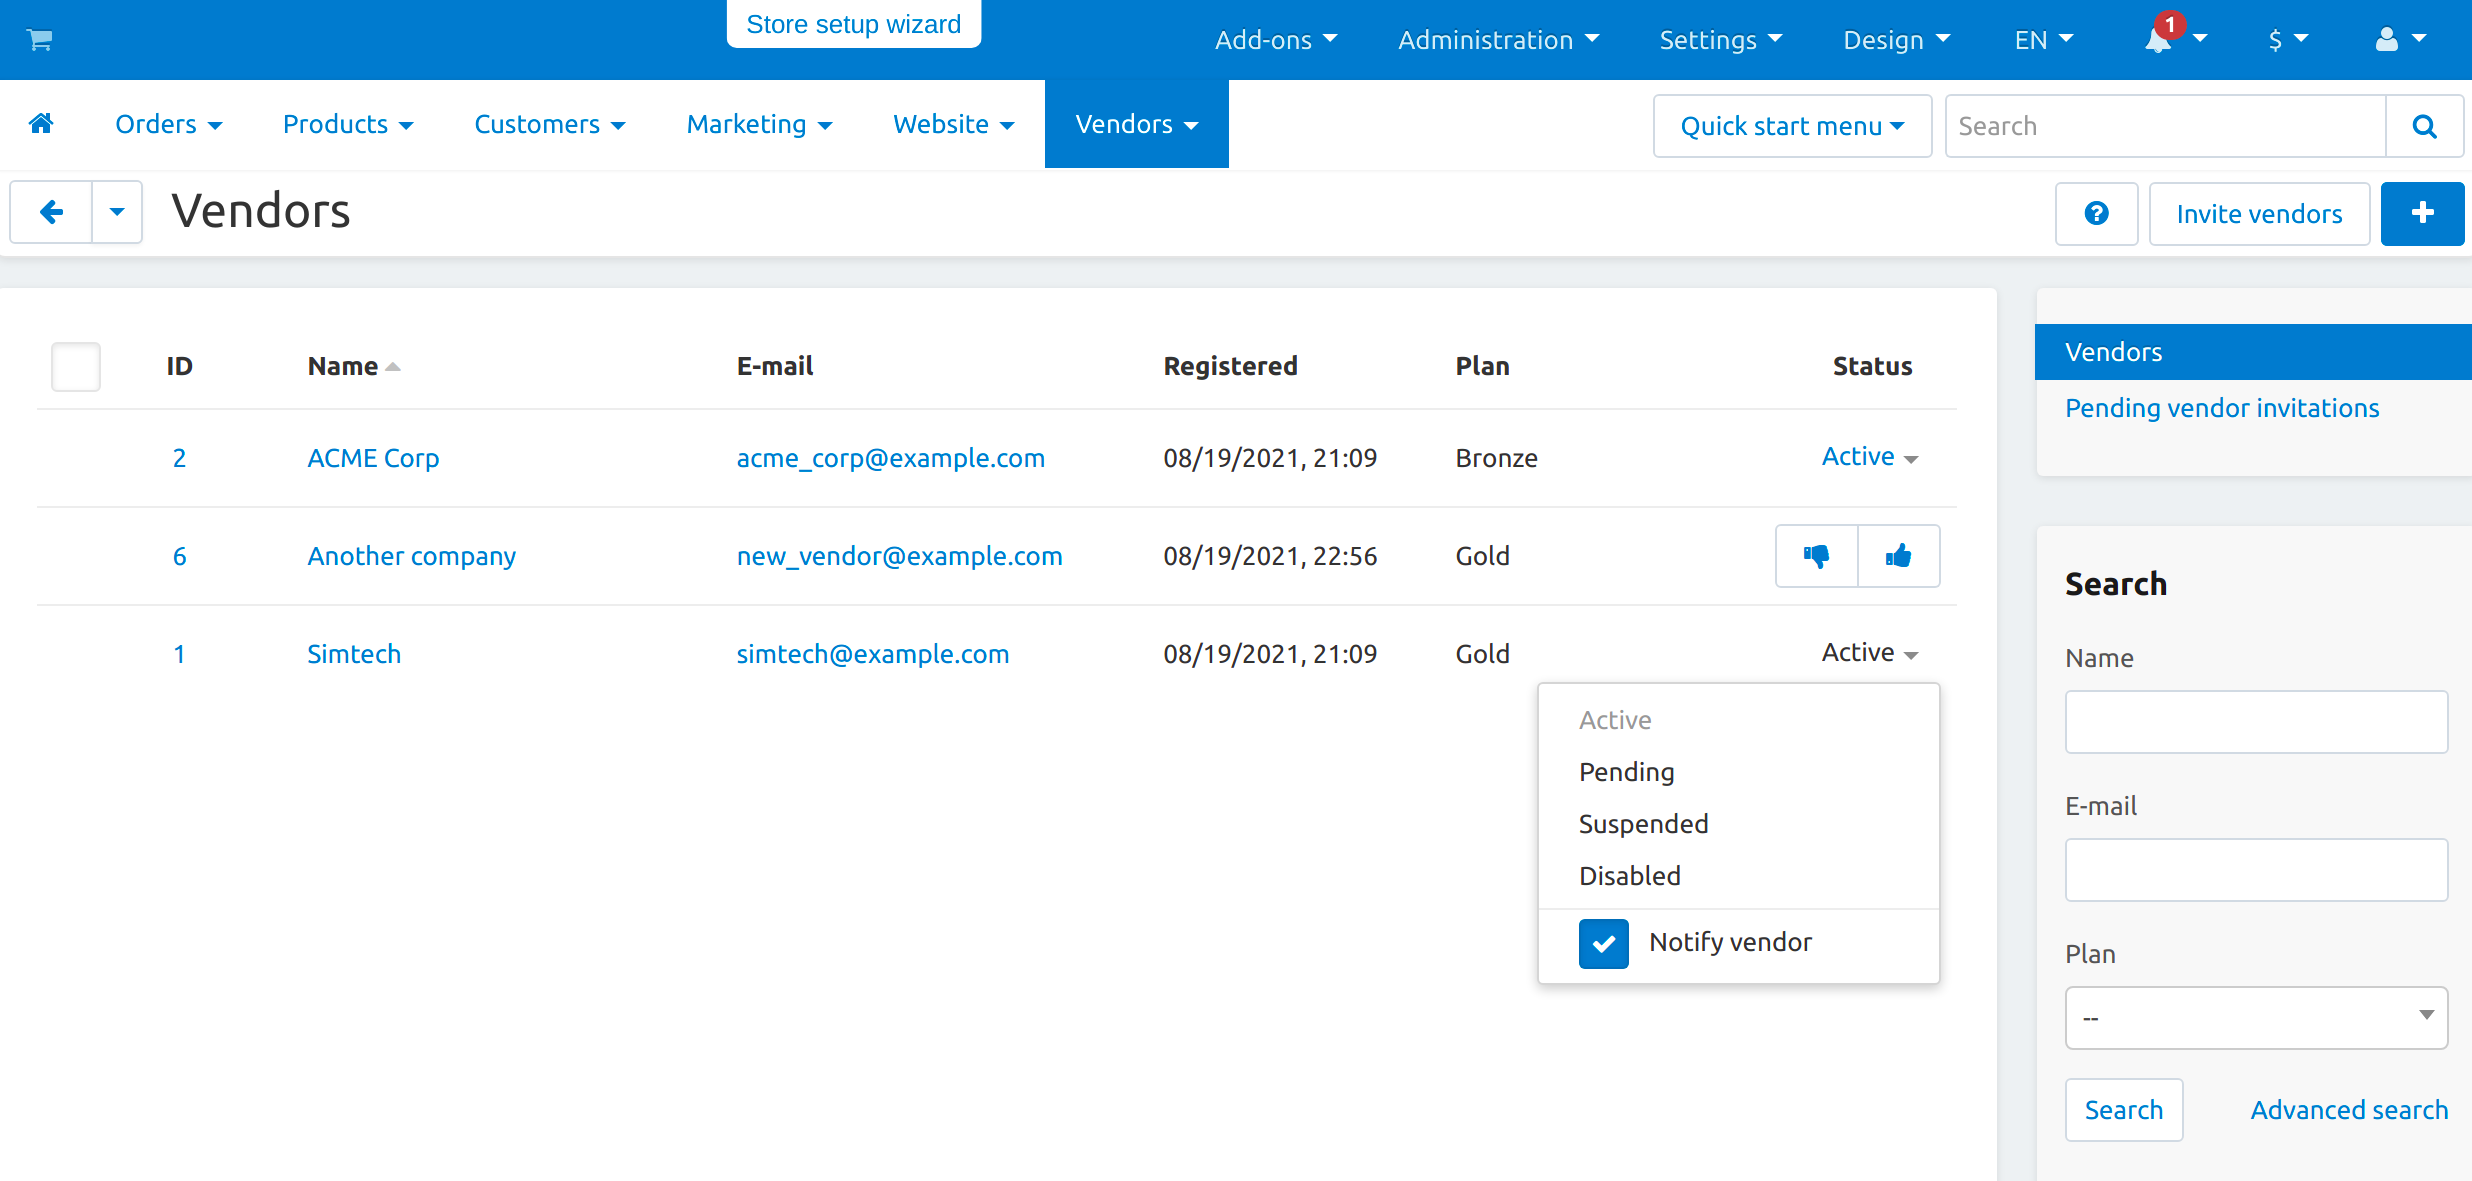 Find the vendor account you want to activate and change its status to Pending or Active.